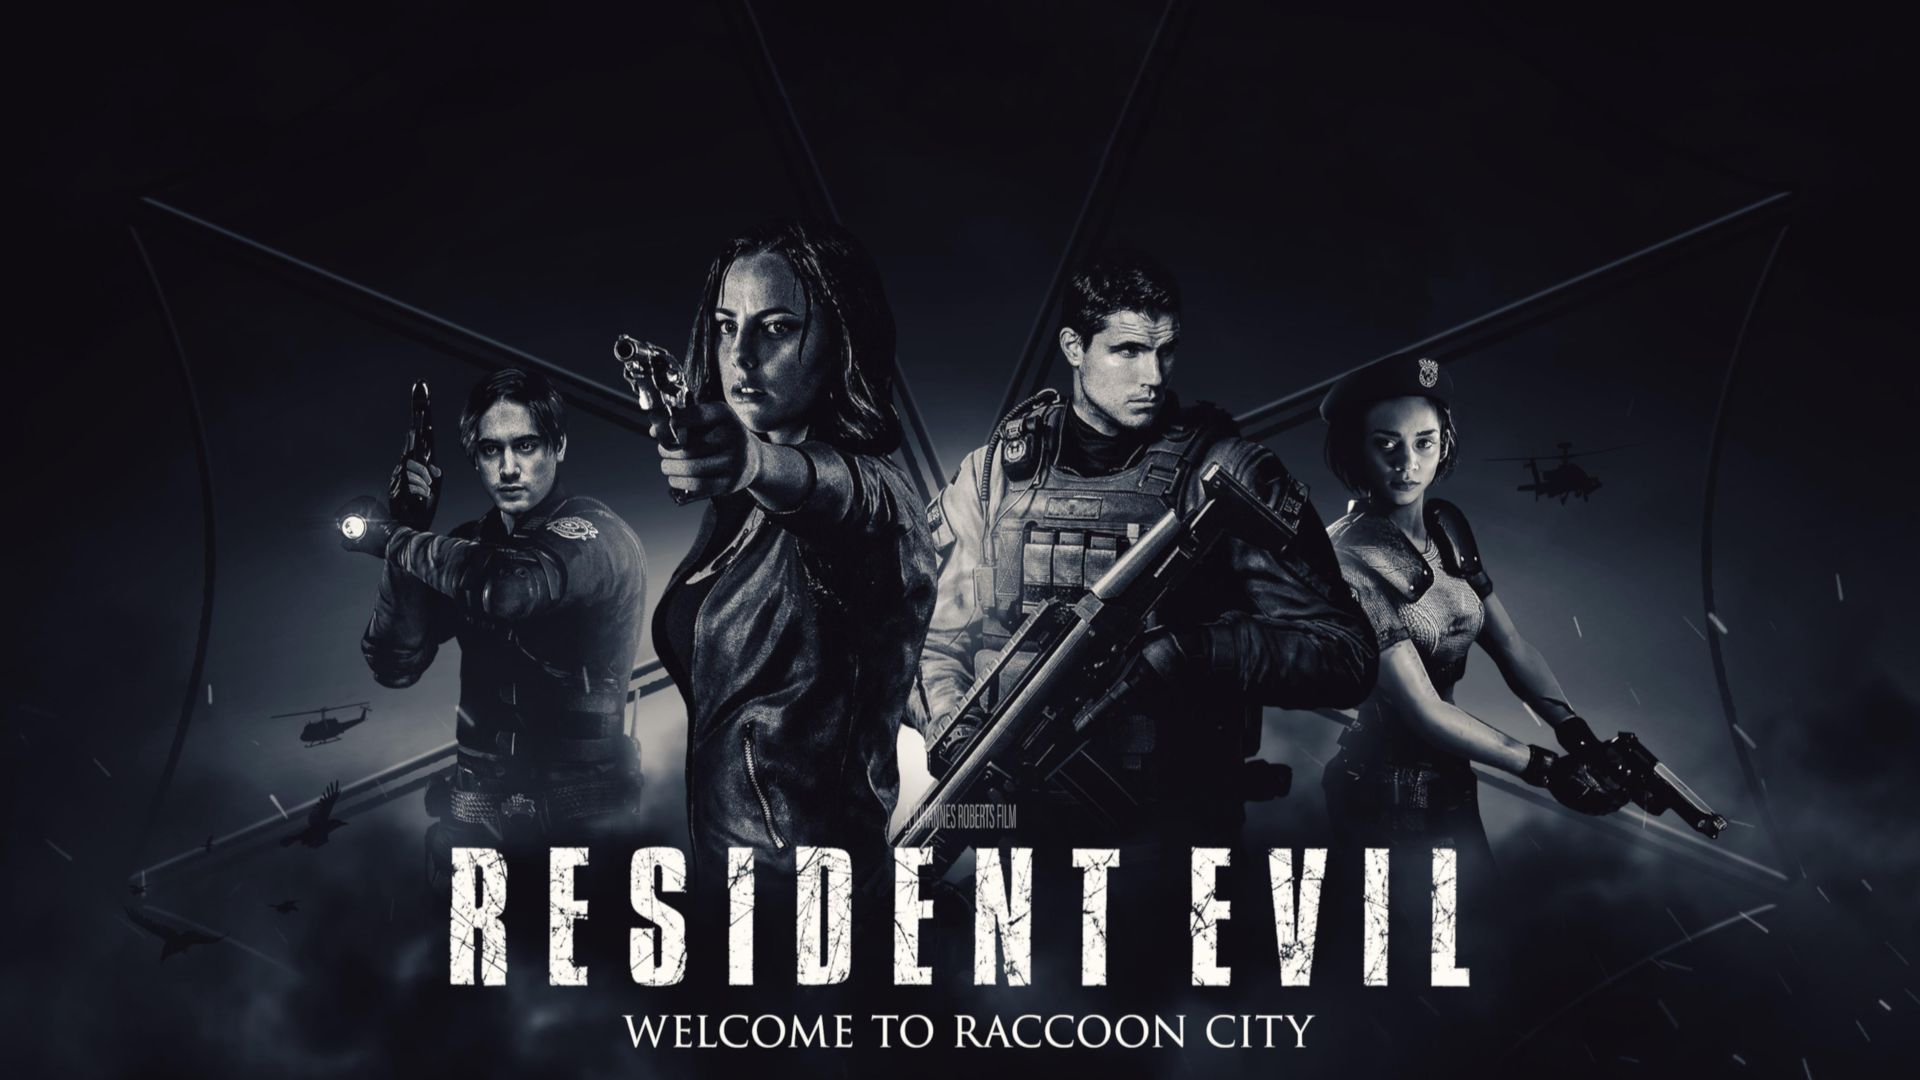 Resident Evil Welcome to Raccoon City Wallpapers - Top 25 Best Welcome to  Raccoon City Backgrounds Download